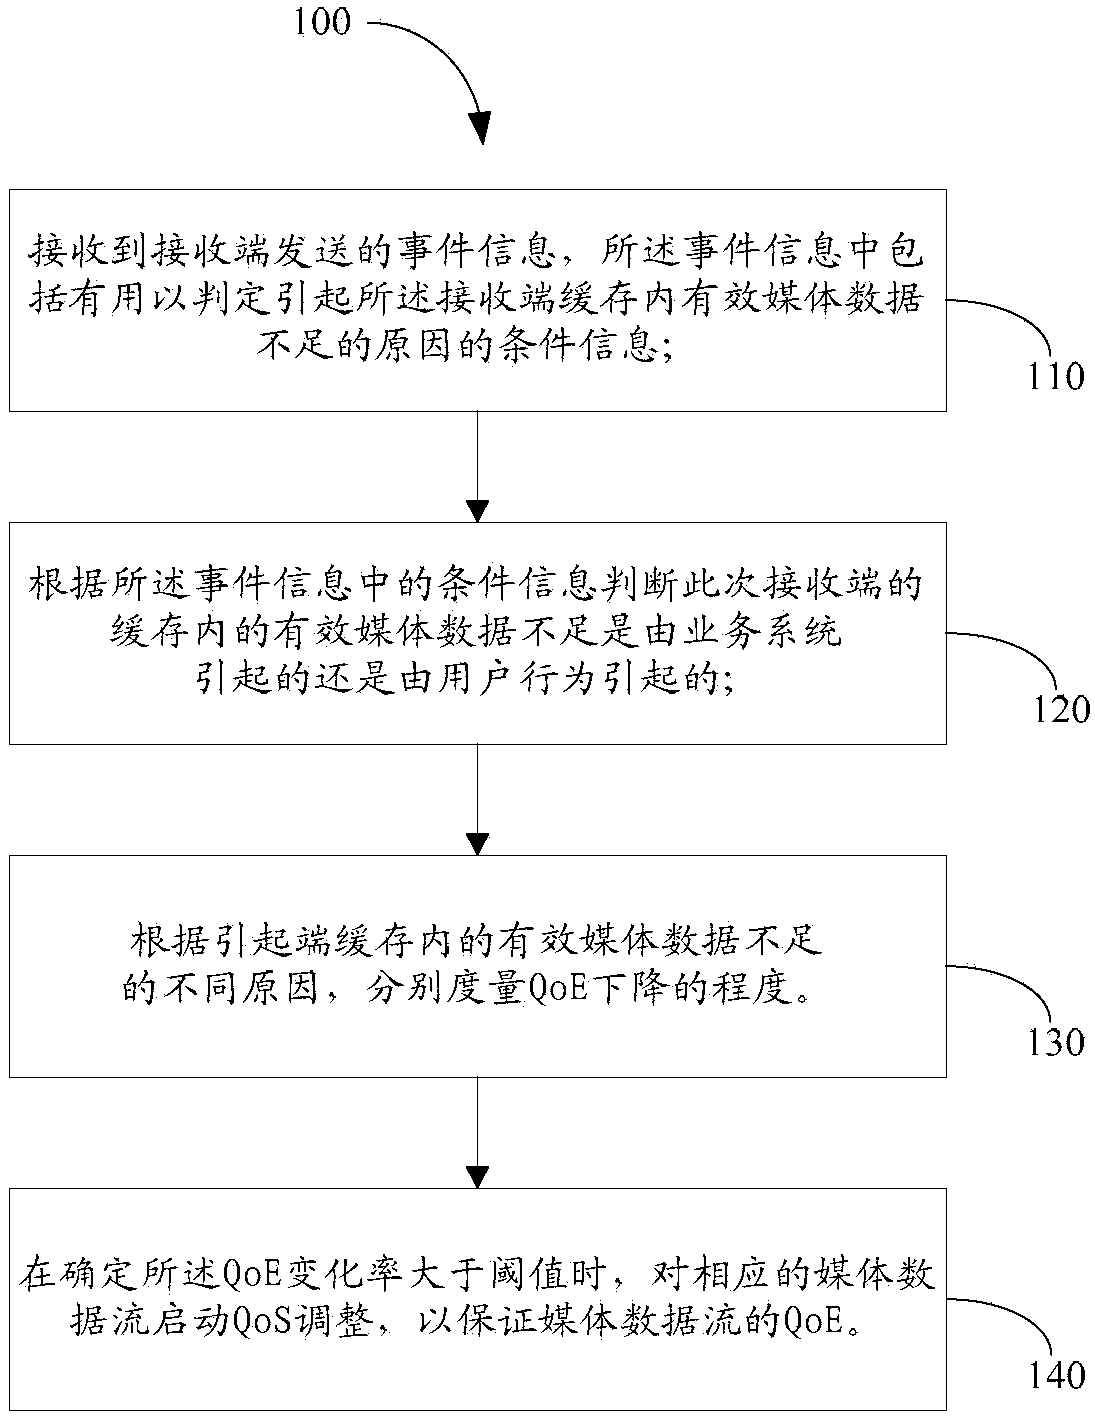 Method and device for measuring quality of experience (QoE)